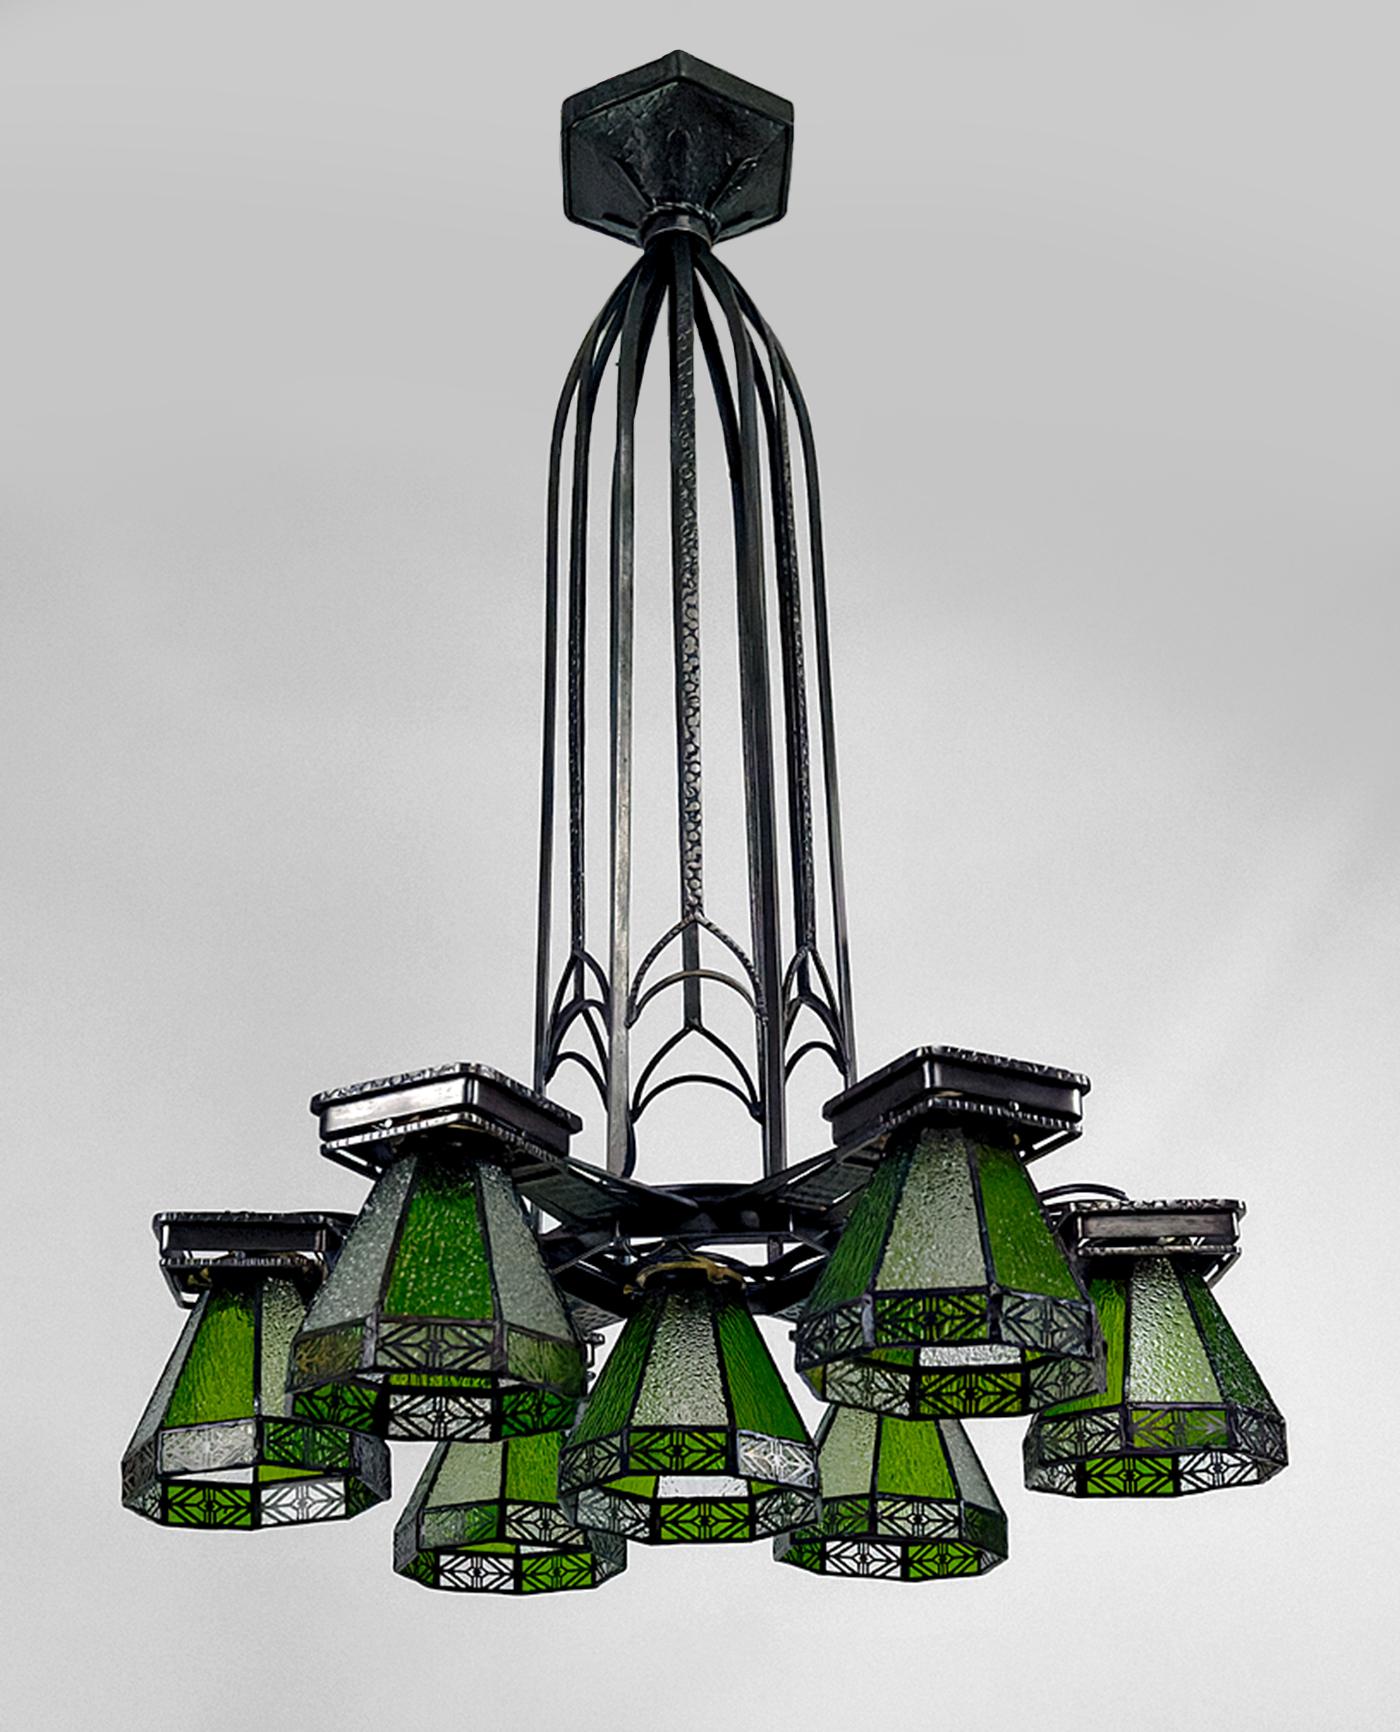 Important wrought iron chandelier.
Art Deco / Gothic.
France, Circa 1920
7 lights
Tulips / stained glass shades.

Restored, new electricity, in perfect condition.

Dimensions:
height 94 cm
diameter 66 cm

Weight: approximately 30 kg